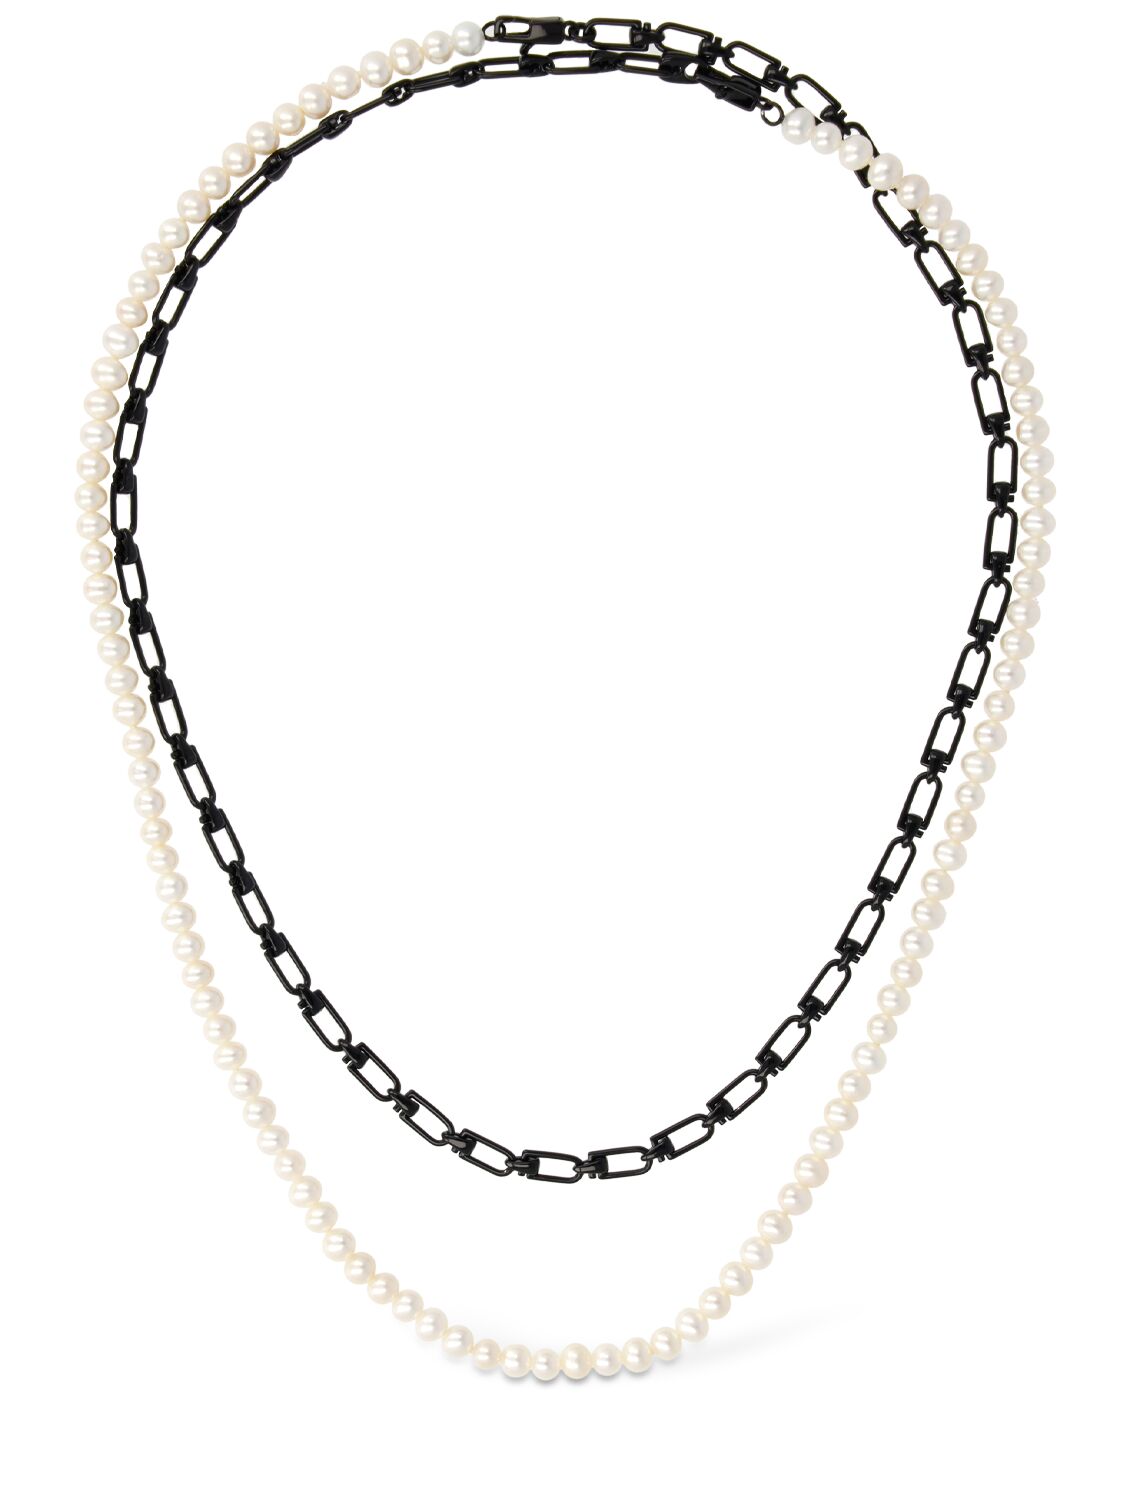 Eéra Chain & Pearl Double Reine Necklace In Black,pearl